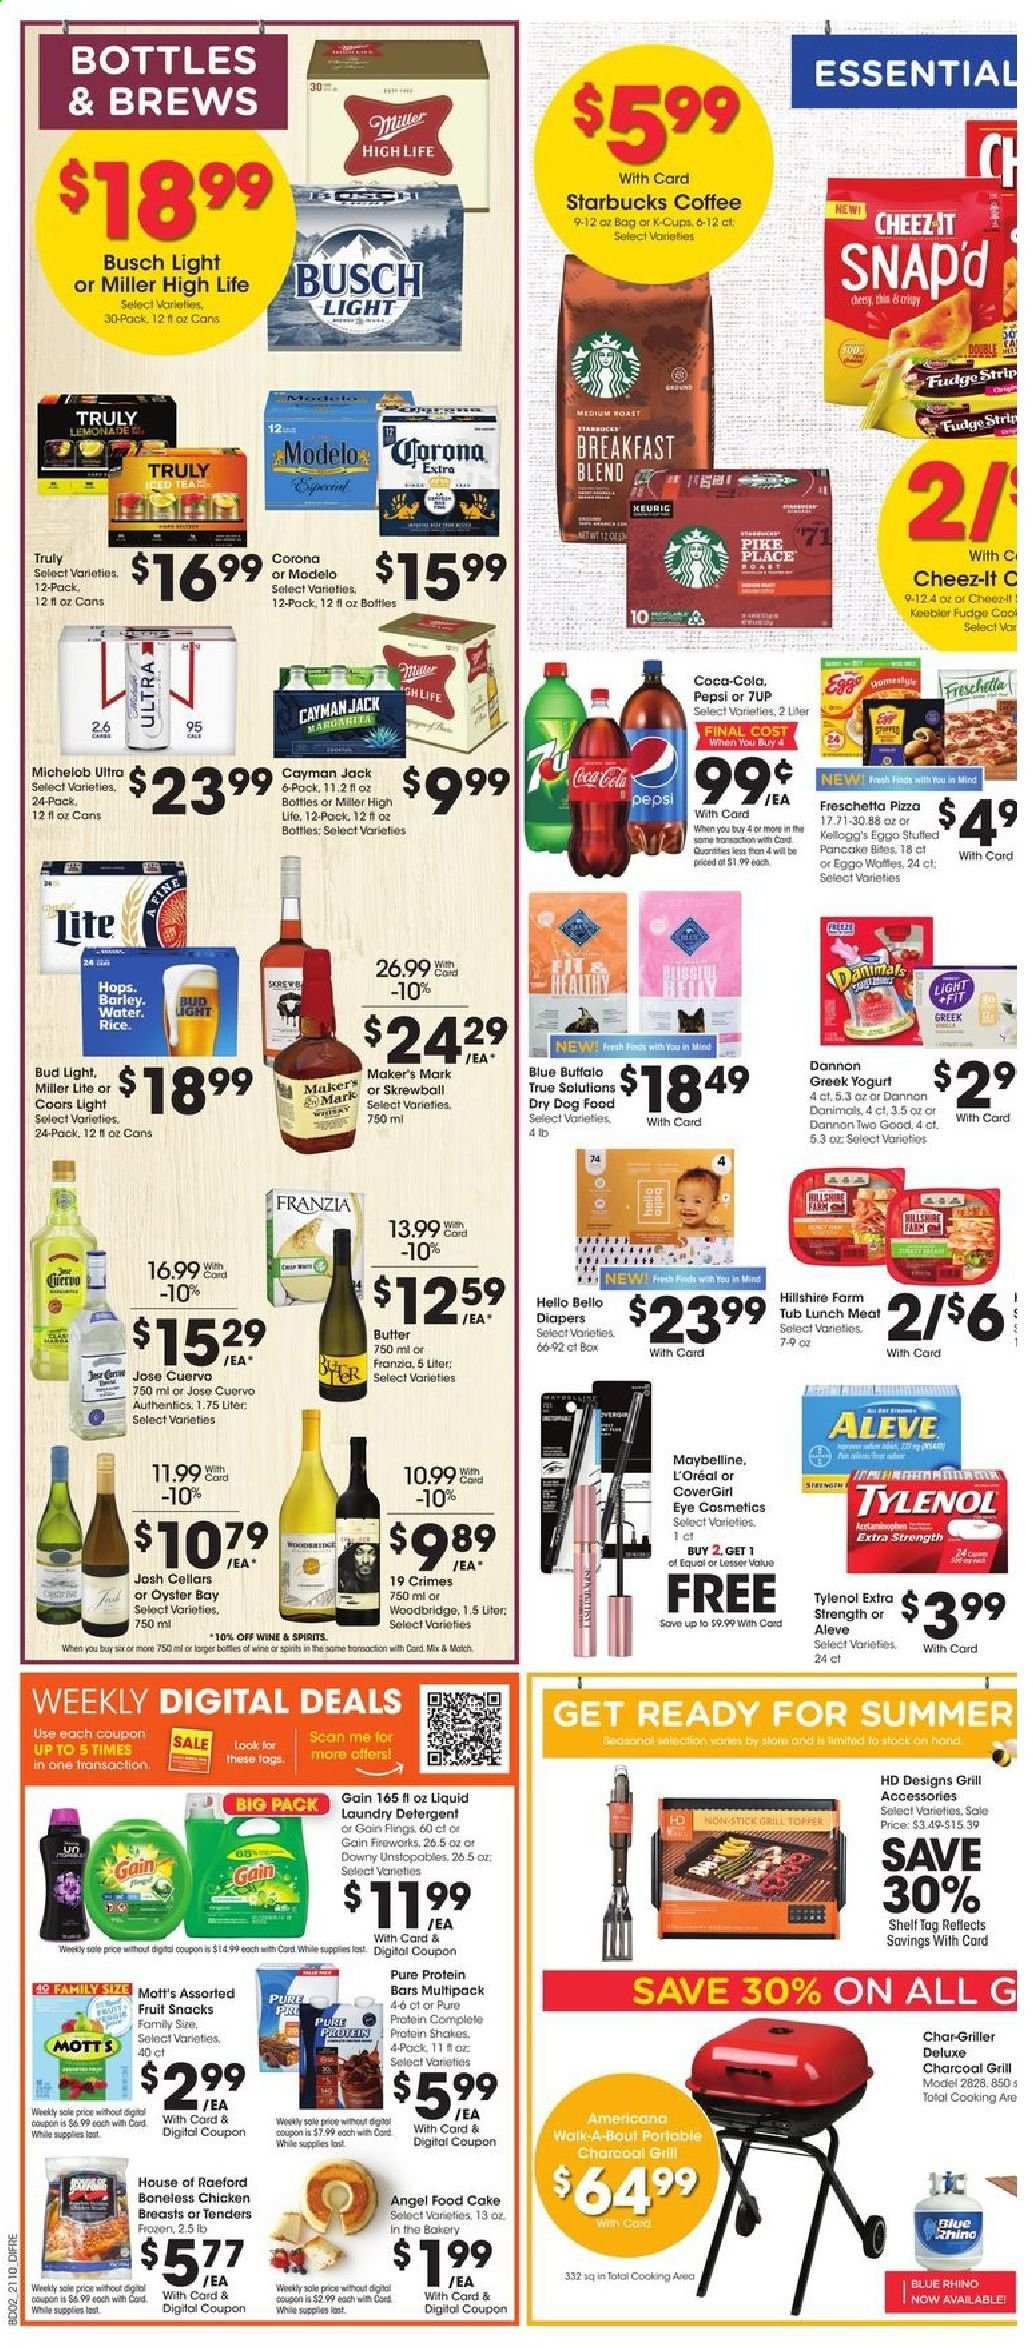 thumbnail - Baker's Flyer - 04/07/2021 - 04/13/2021 - Sales products - cake, Angel Food, oysters, pizza, pancakes, Hillshire Farm, lunch meat, greek yoghurt, yoghurt, Dannon, shake, fudge, fruit snack, Cheez-It, Coca-Cola, lemonade, Pepsi, 7UP, Mott's, tea, coffee, Starbucks, coffee capsules, K-Cups, breakfast blend, wine, Woodbridge, TRULY, beer, Miller Lite, Coors, Michelob, Busch, Bud Light, Corona Extra, Modelo, chicken breasts, nappies, detergent, Gain, Unstopables, laundry detergent, L’Oréal, Maybelline, animal food, dog food, dry dog food, grill, Aleve, Tylenol. Page 5.